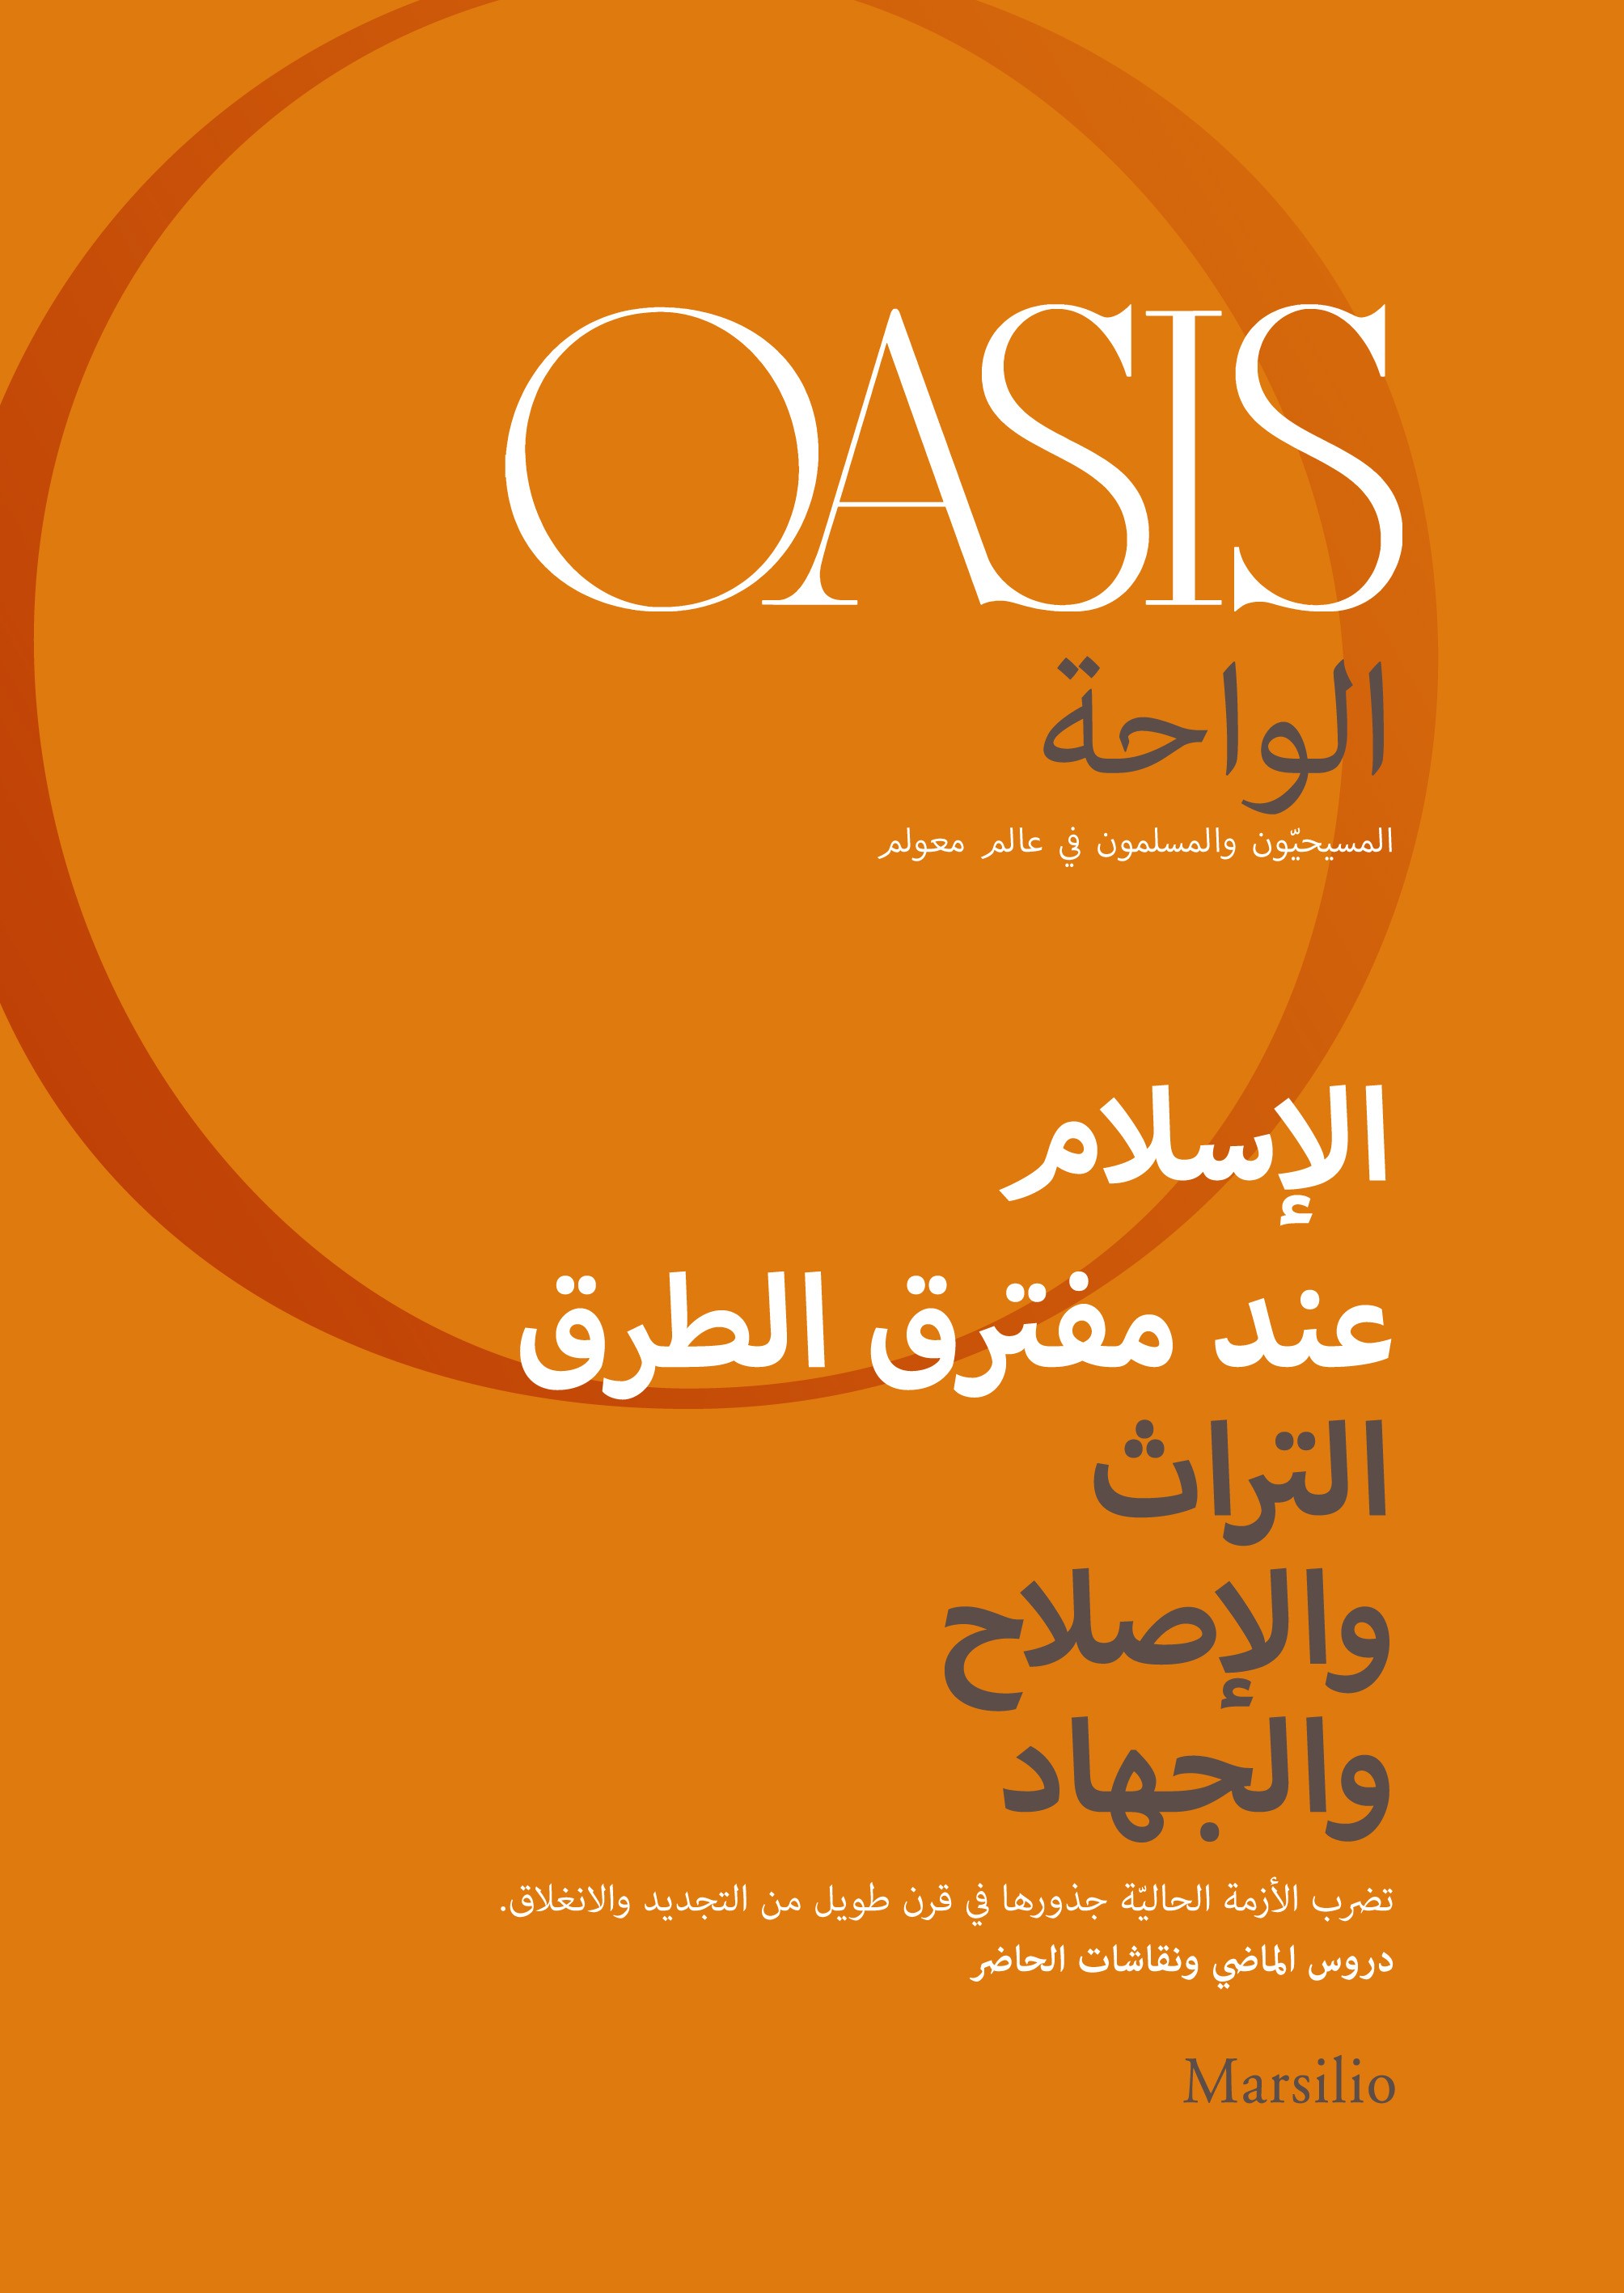 Oasis n. 21, Islam at the Crossroads (Arabic Edition) - Librerie.coop